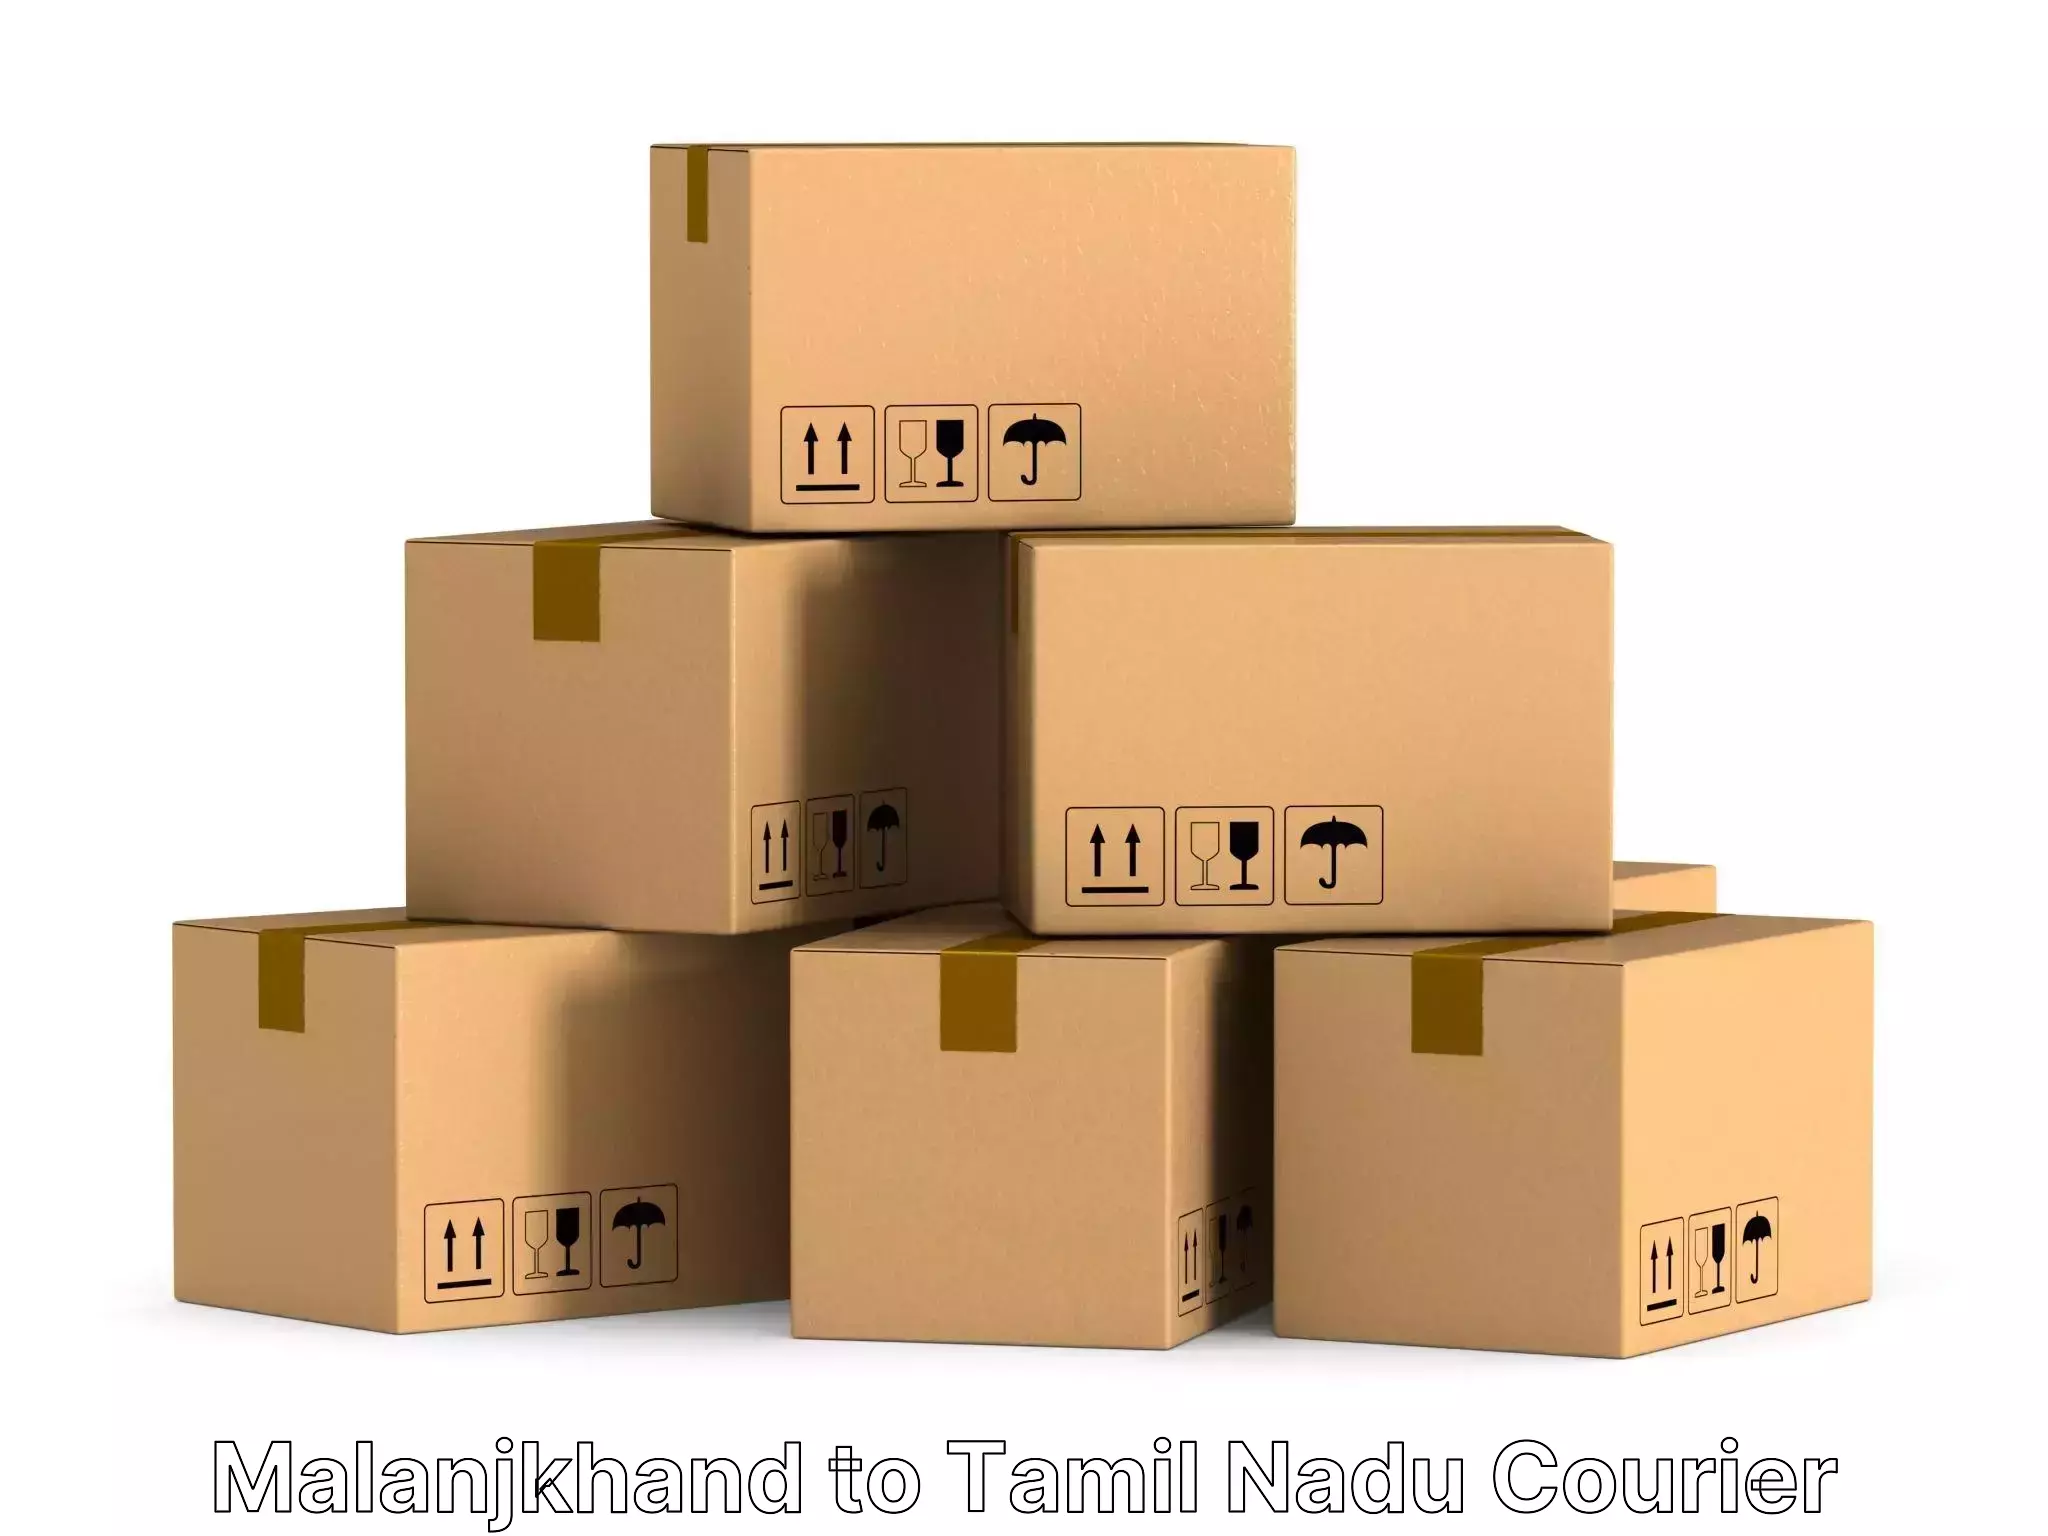 Furniture delivery service Malanjkhand to Chennai Port